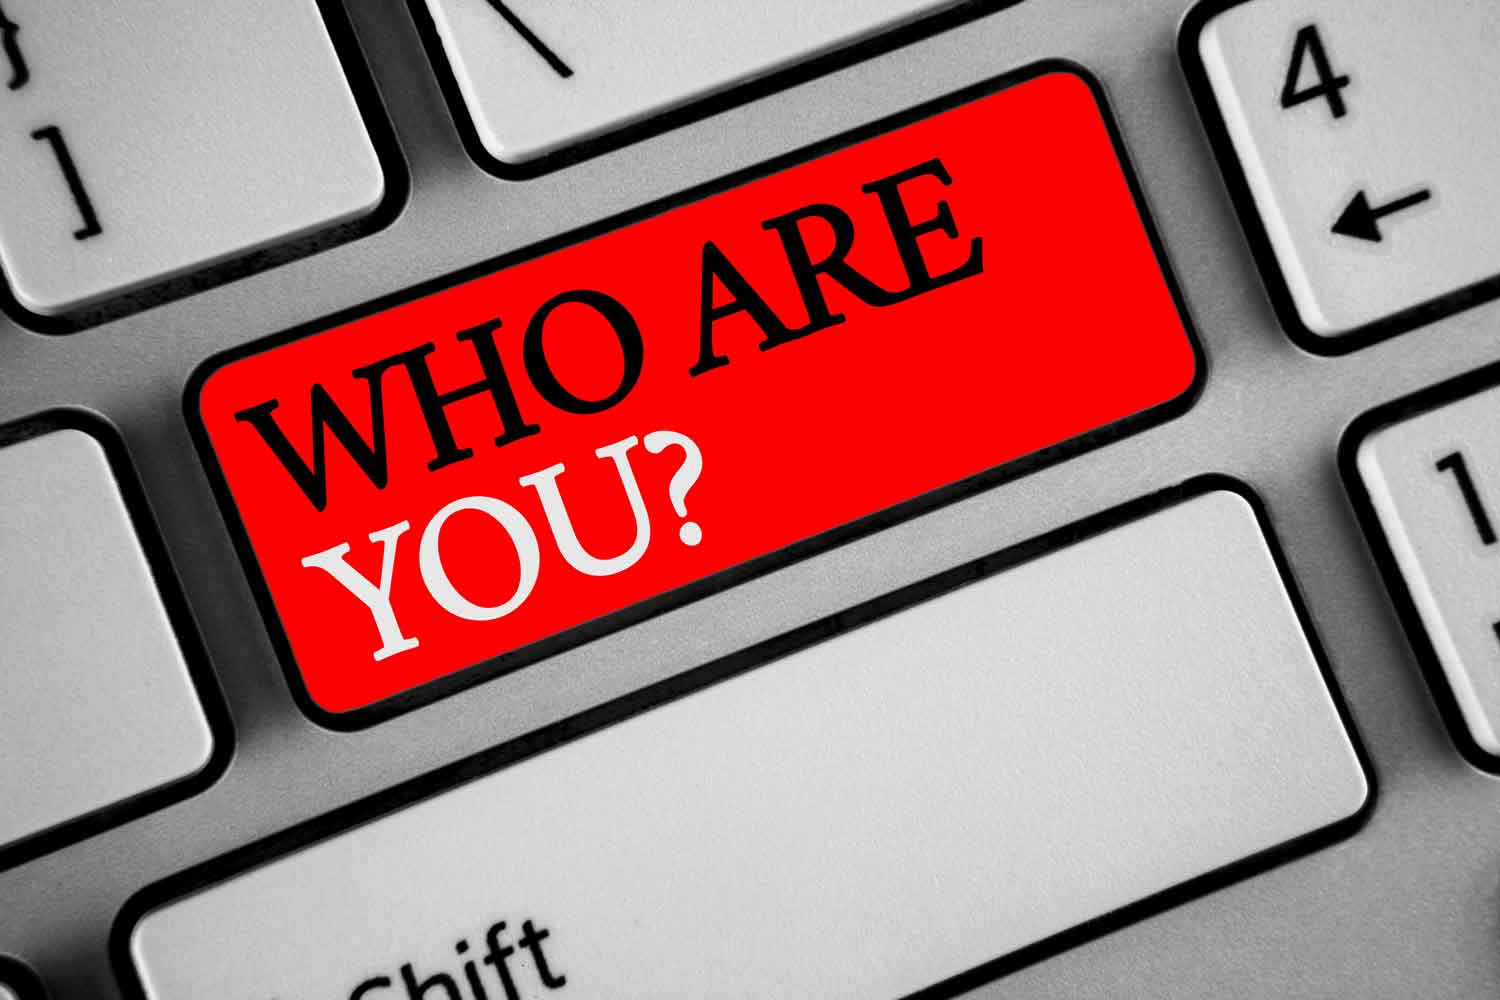 Who are you? Brand Building Part 1